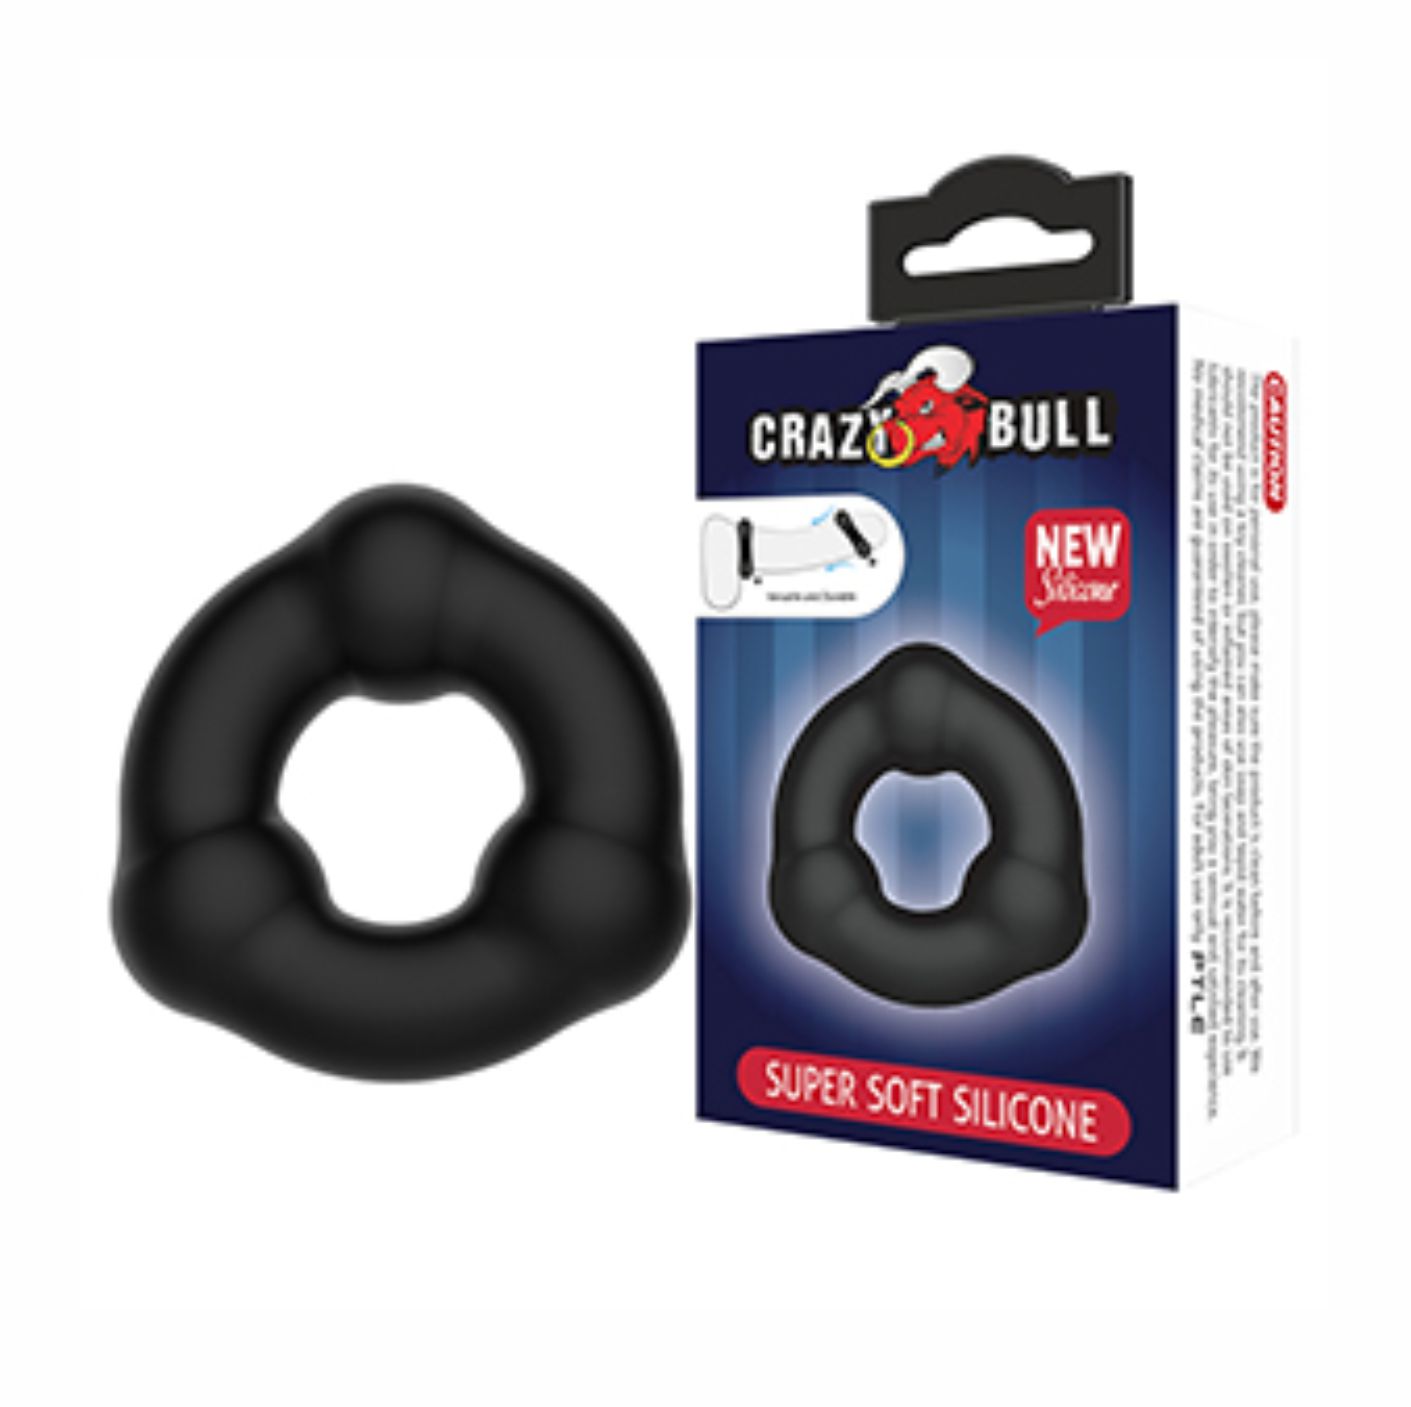 Ribbed Silicone Ring "Crazy Bull" 18mm